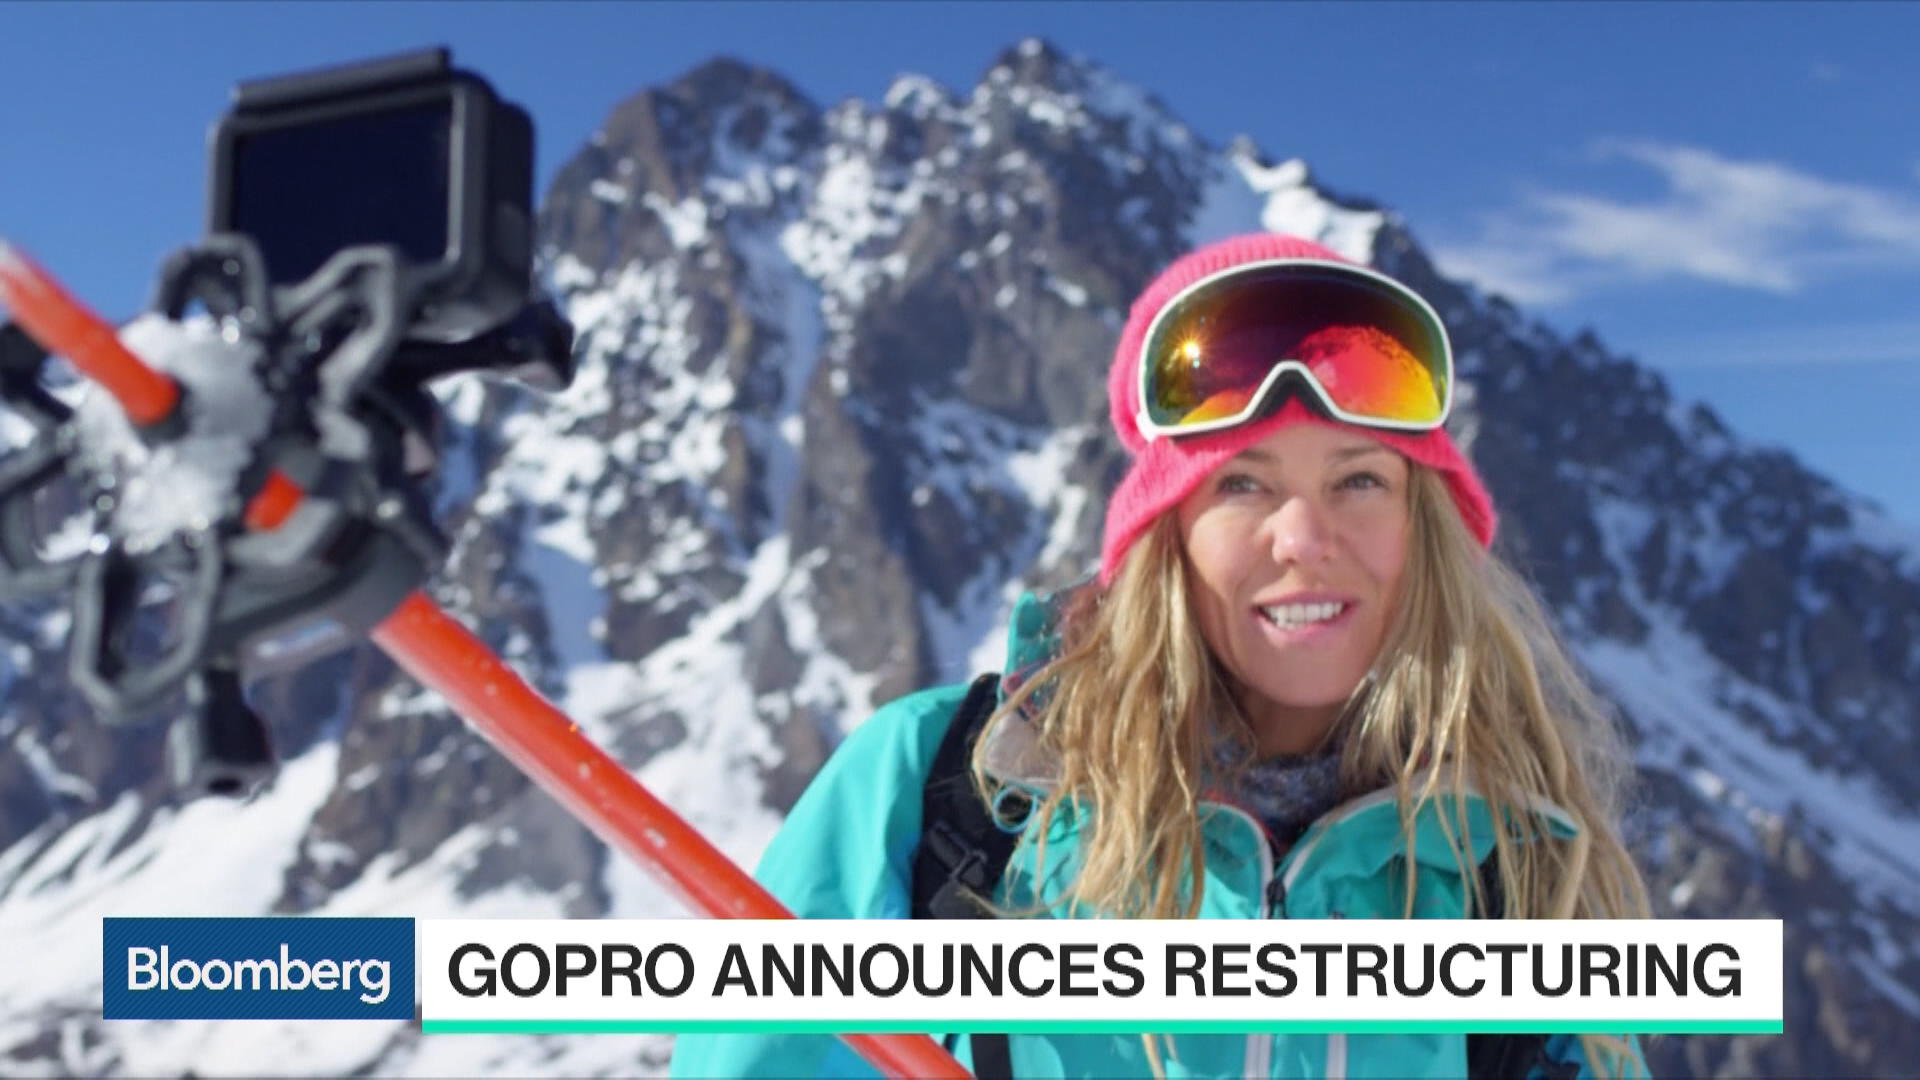 Pacific Crest Analyst: GoPro Restructuring Not a Surprise - Bloomberg